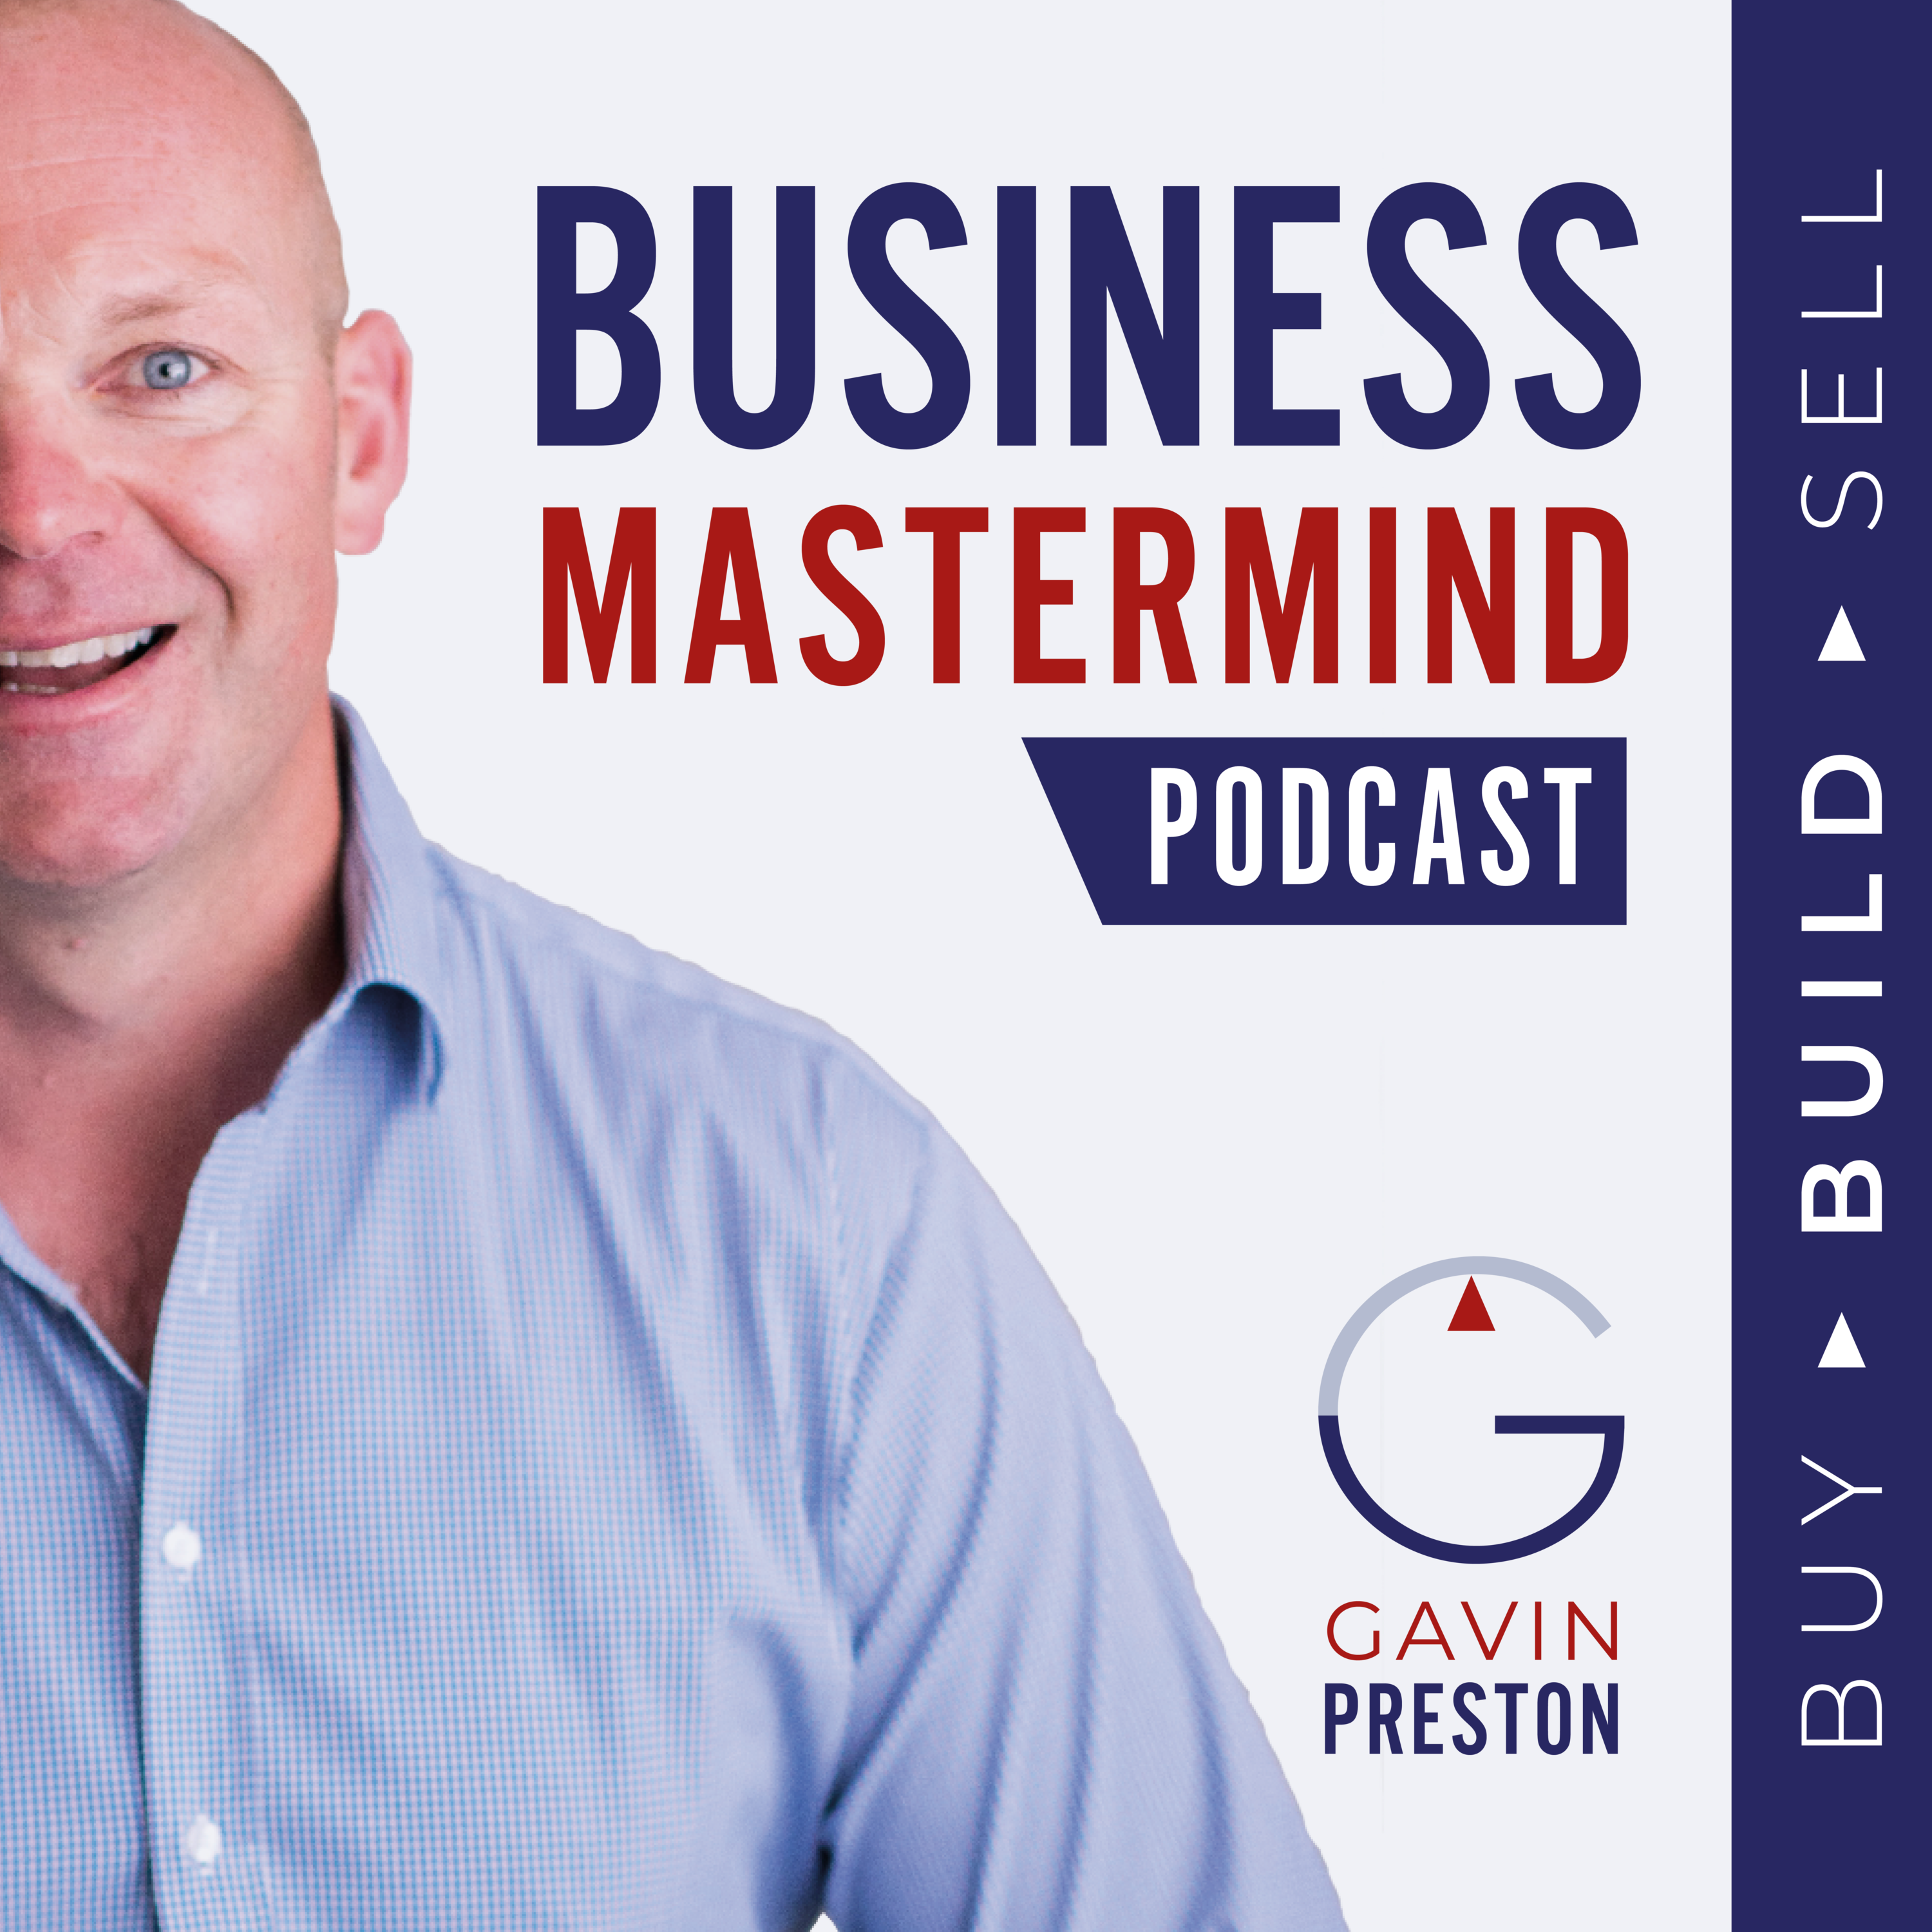 Roland Frasier on Mastering Trends and Using Them To Your Advantage